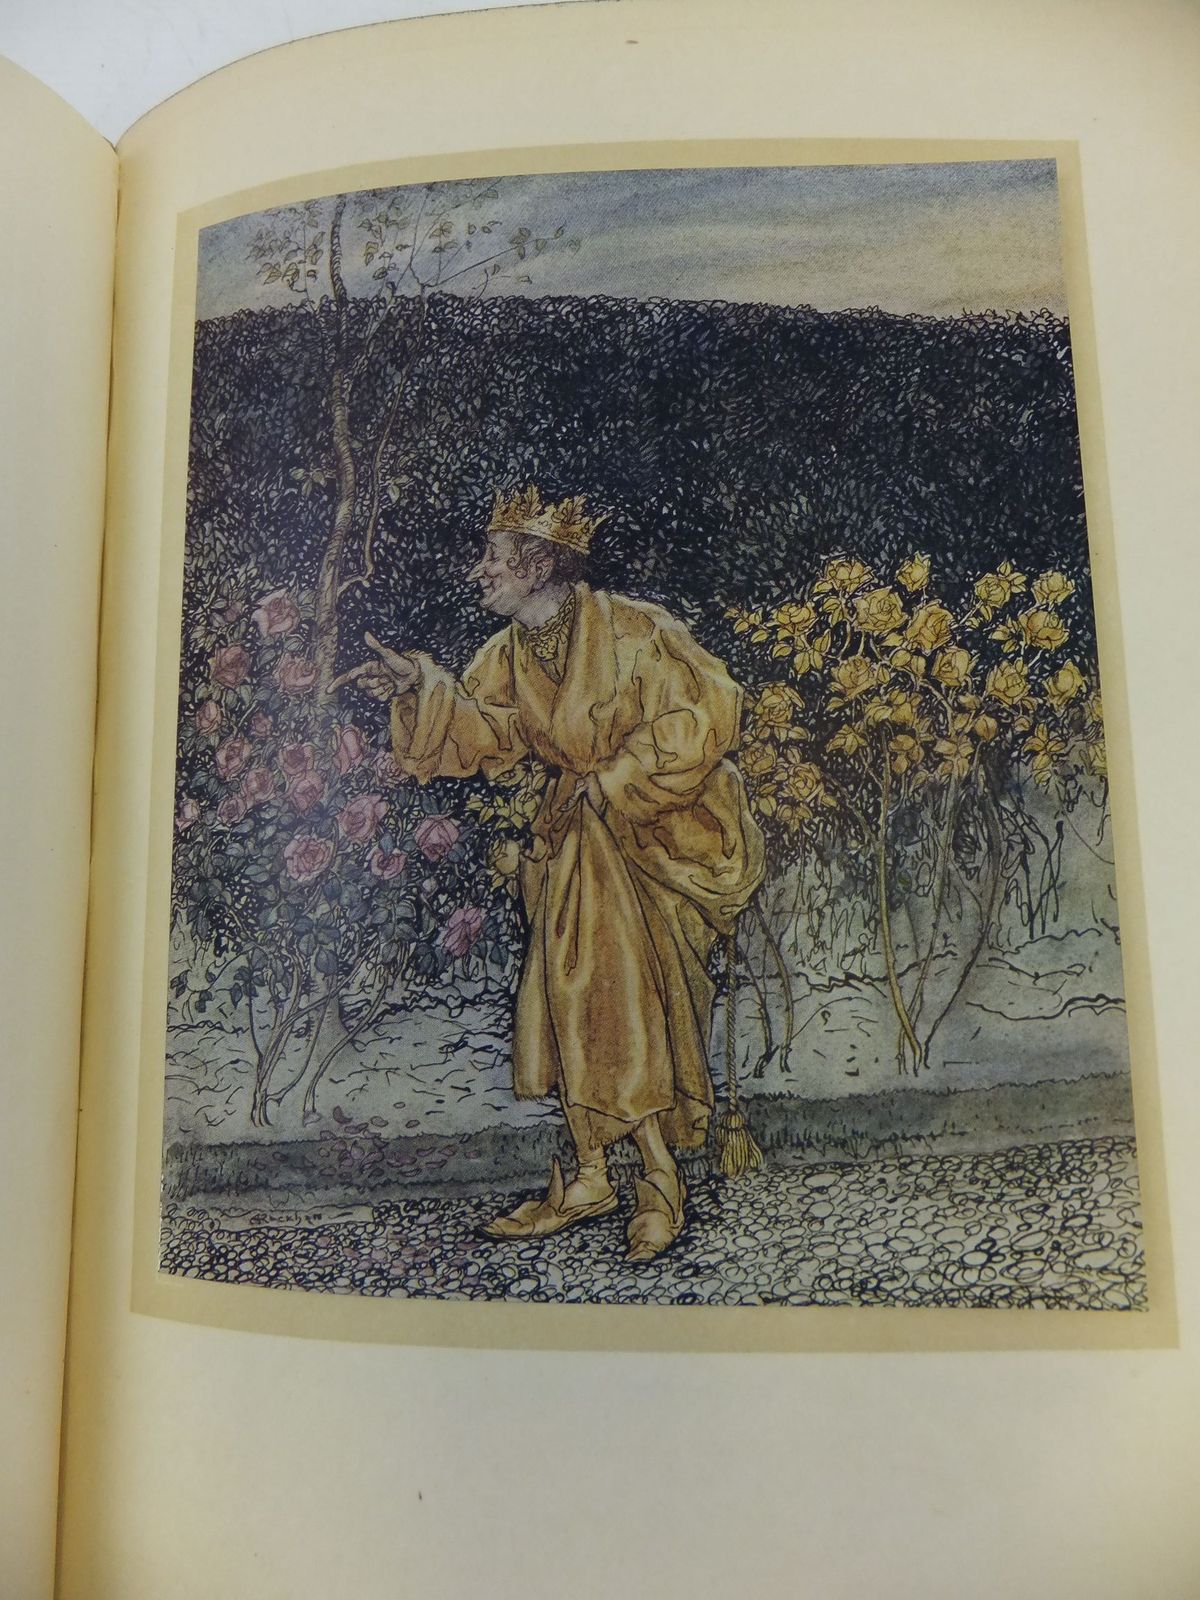 Photo of A WONDER BOOK written by Hawthorne, Nathaniel illustrated by Rackham, Arthur published by Hodder & Stoughton (STOCK CODE: 1710414)  for sale by Stella & Rose's Books